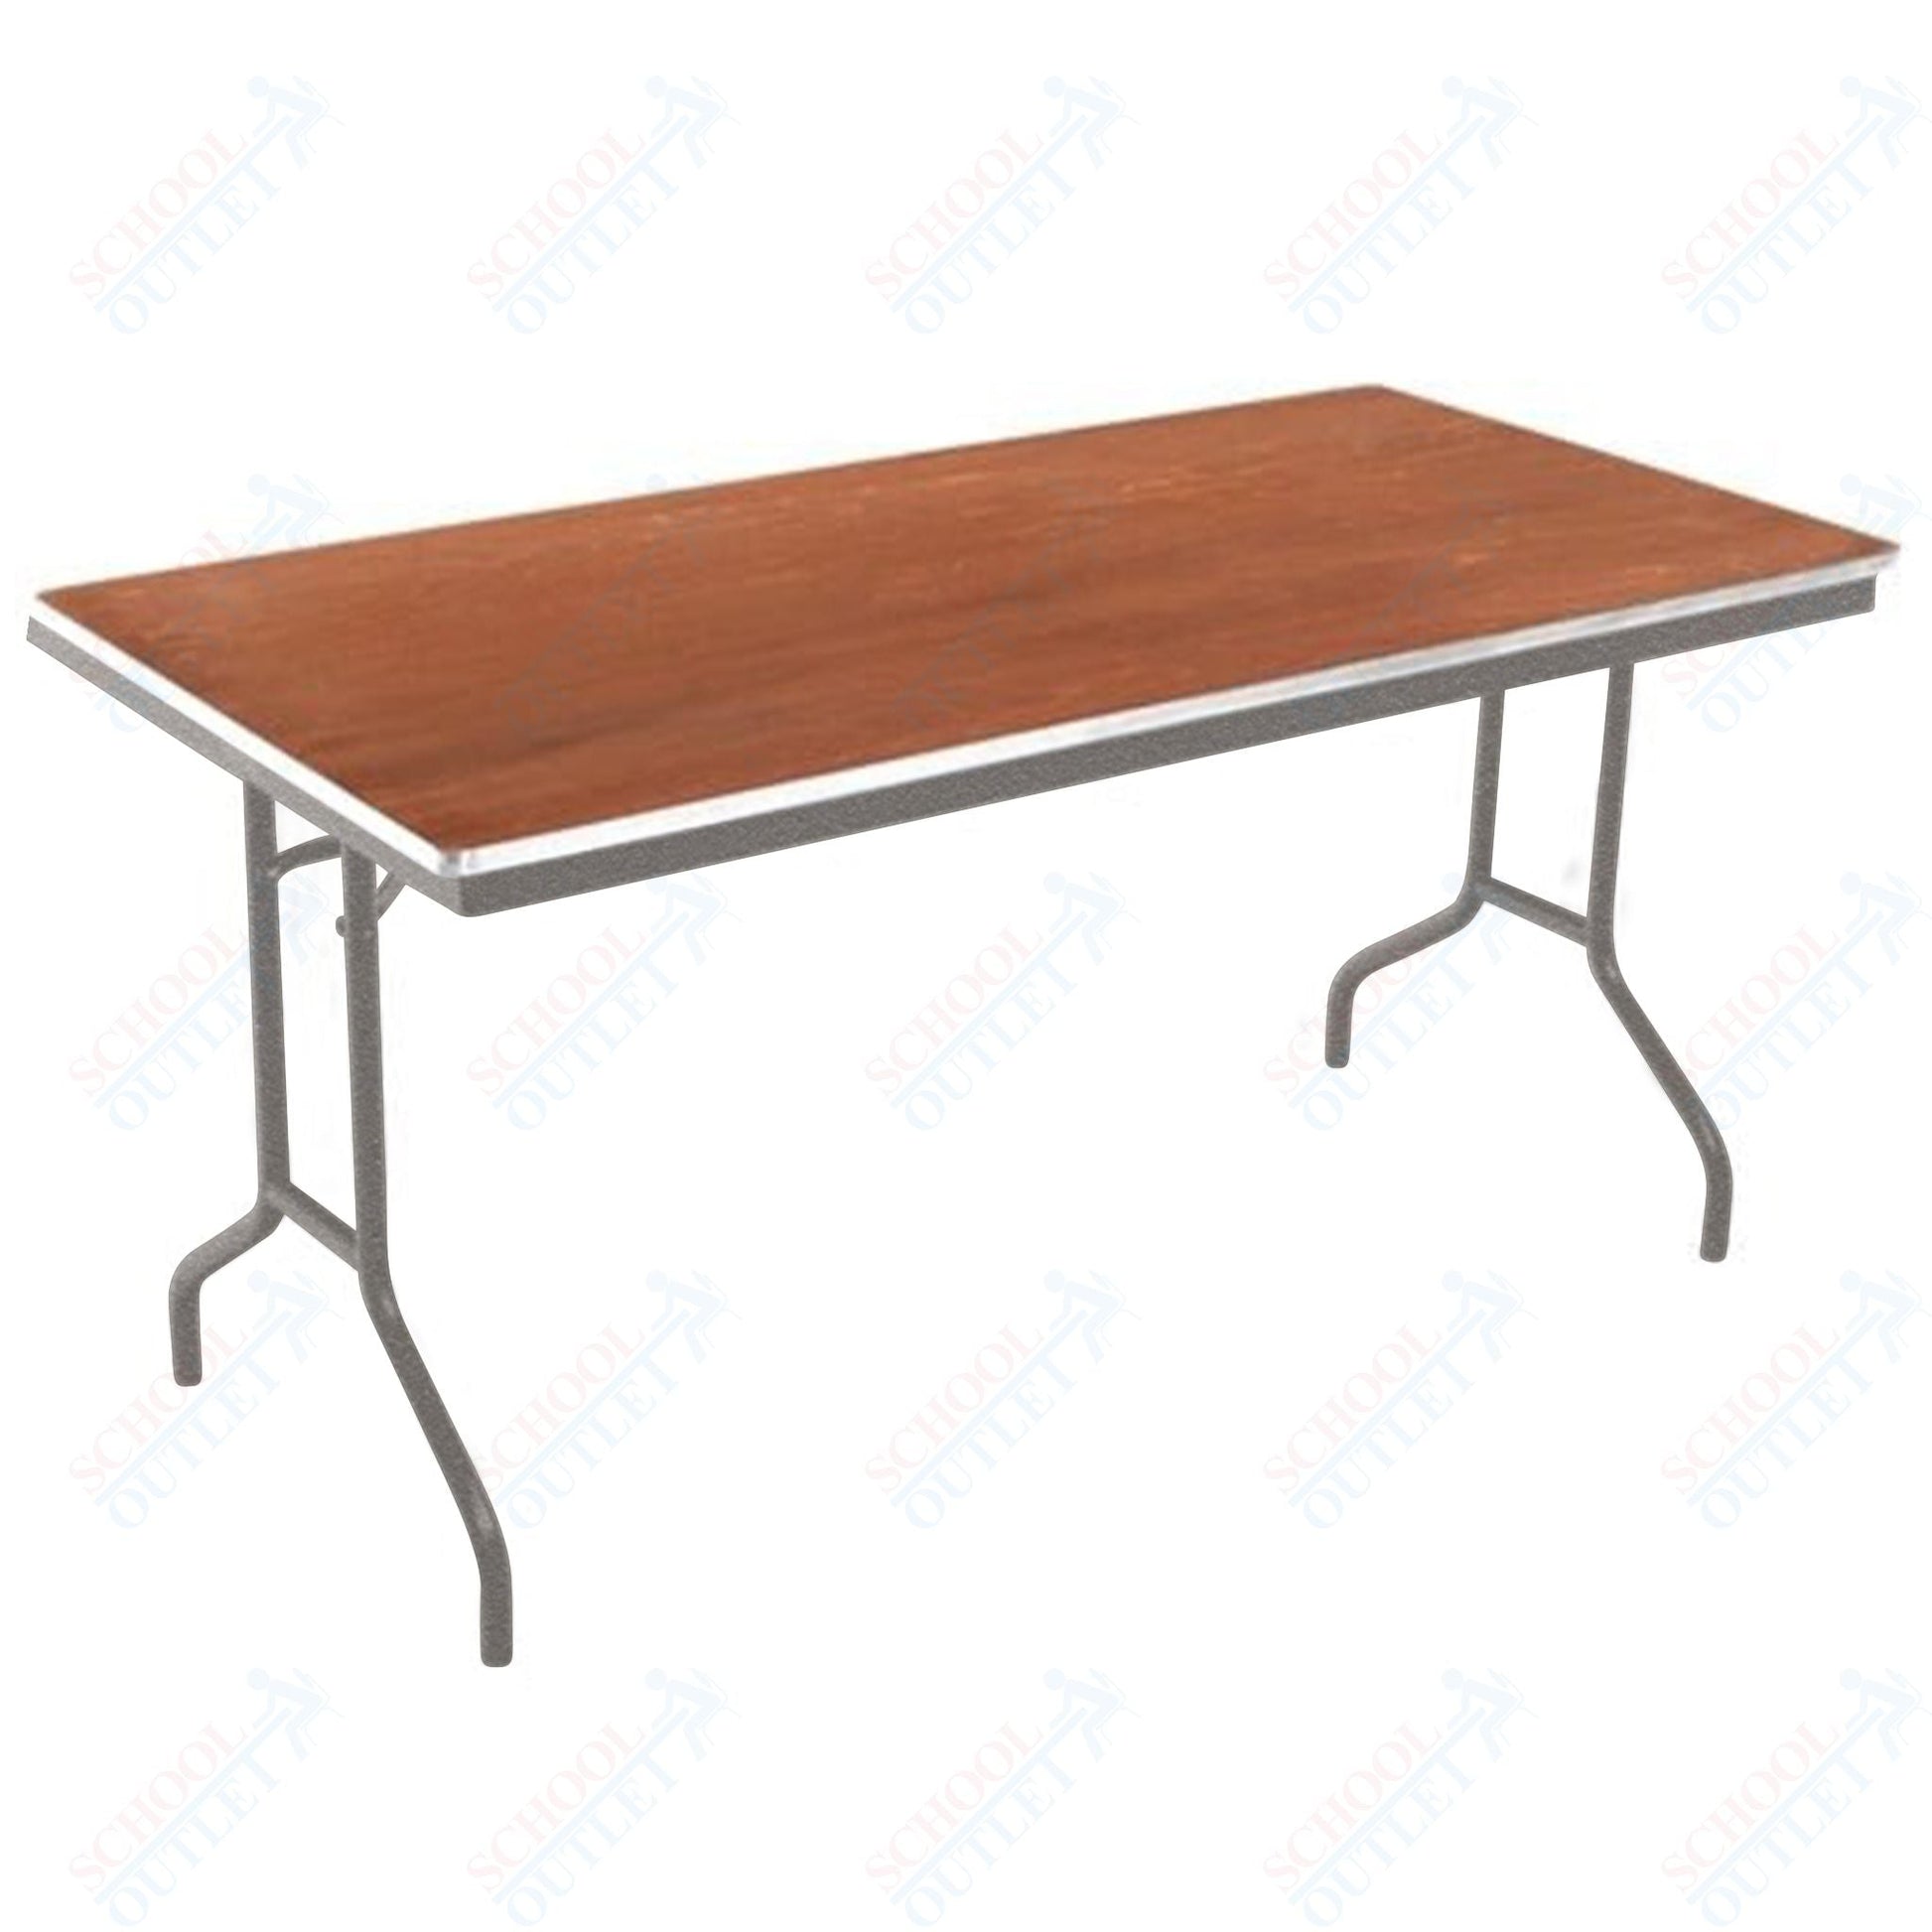 AmTab Folding Table - Plywood Stained and Sealed - Aluminum Edge - 18"W x 72"L x 29"H (AmTab AMT - 186PA) - SchoolOutlet